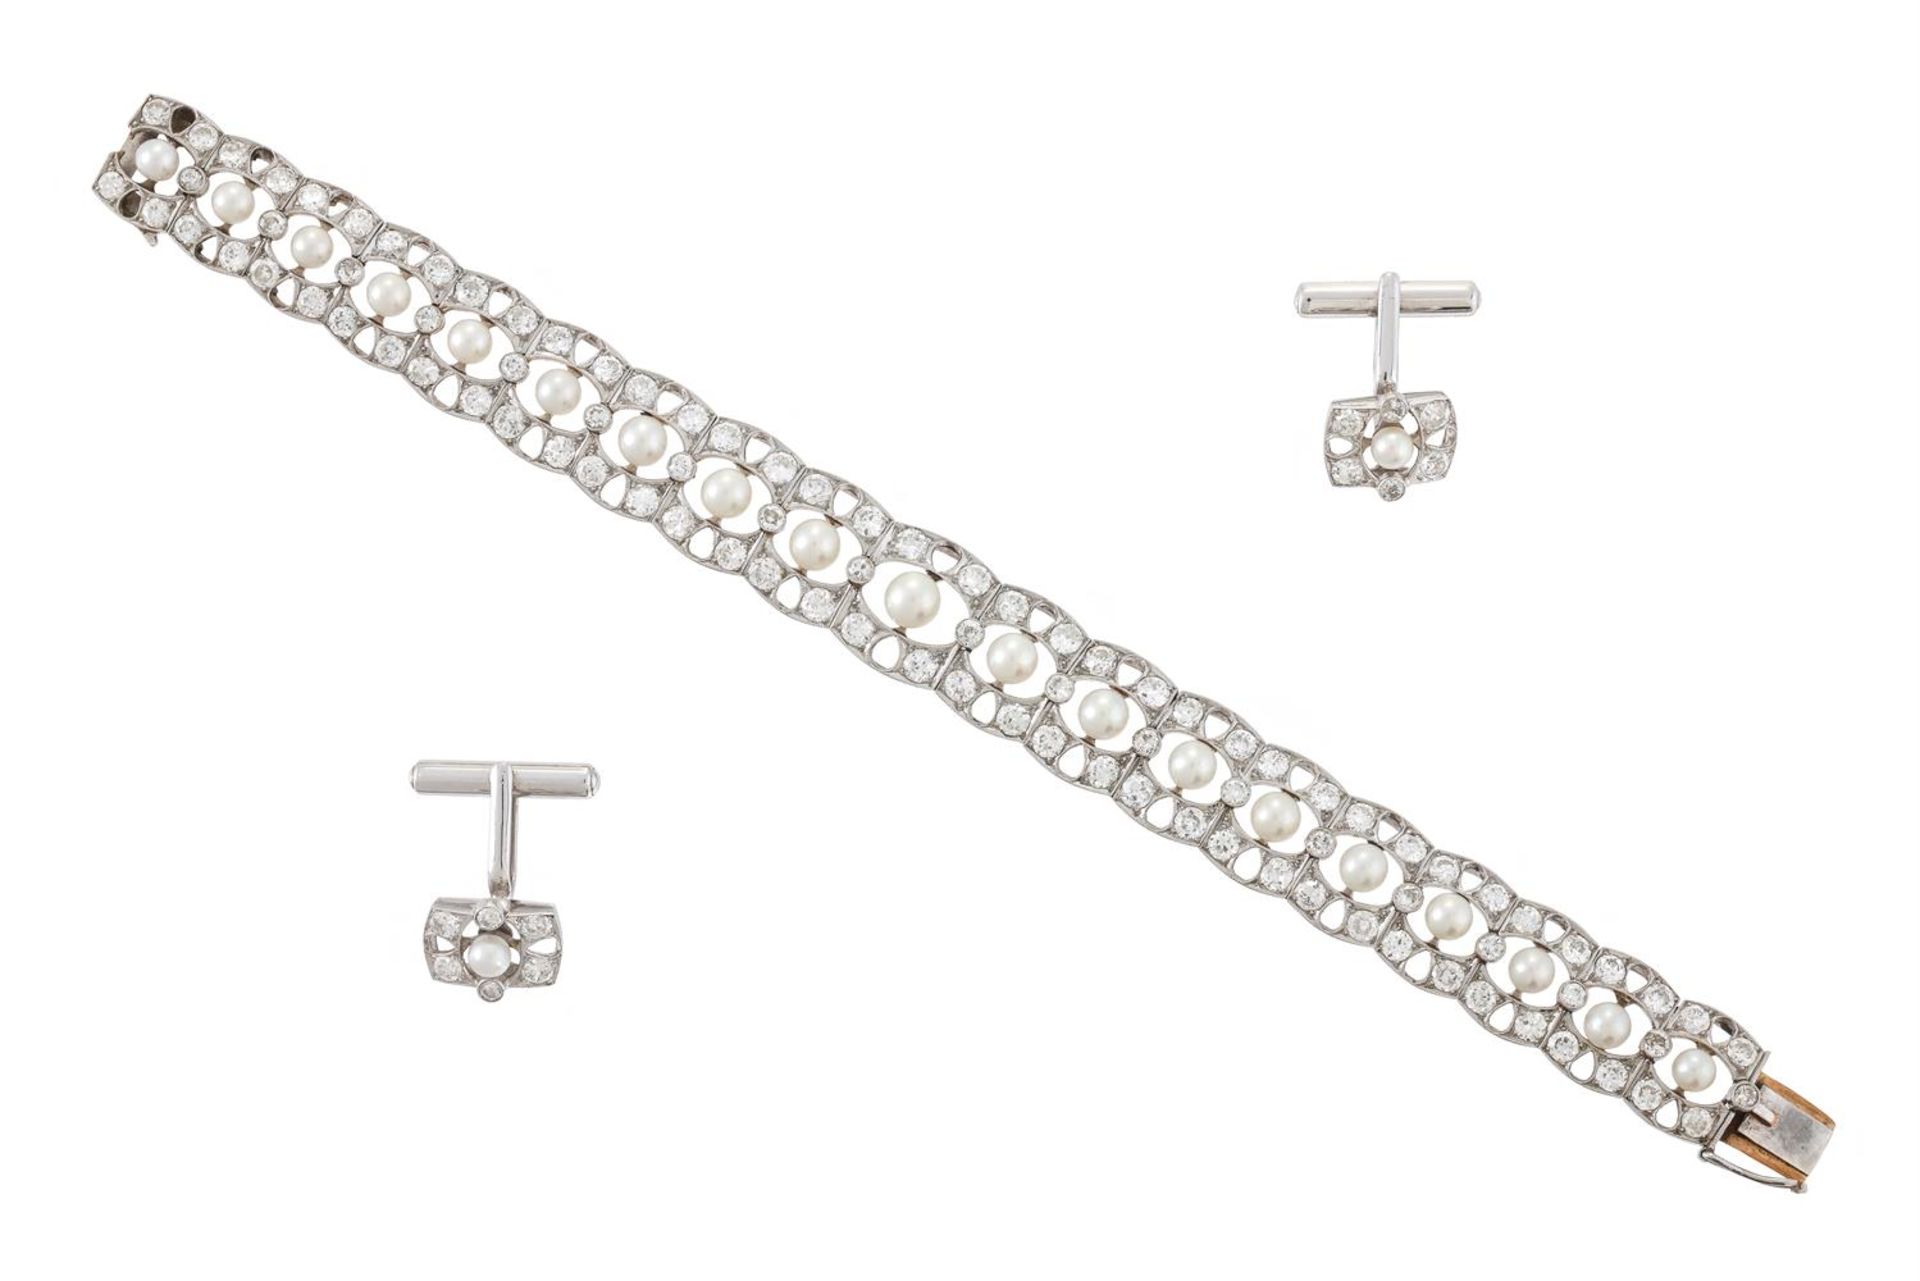 A 1930S DIAMOND AND CULTURED PEARL BRACELET